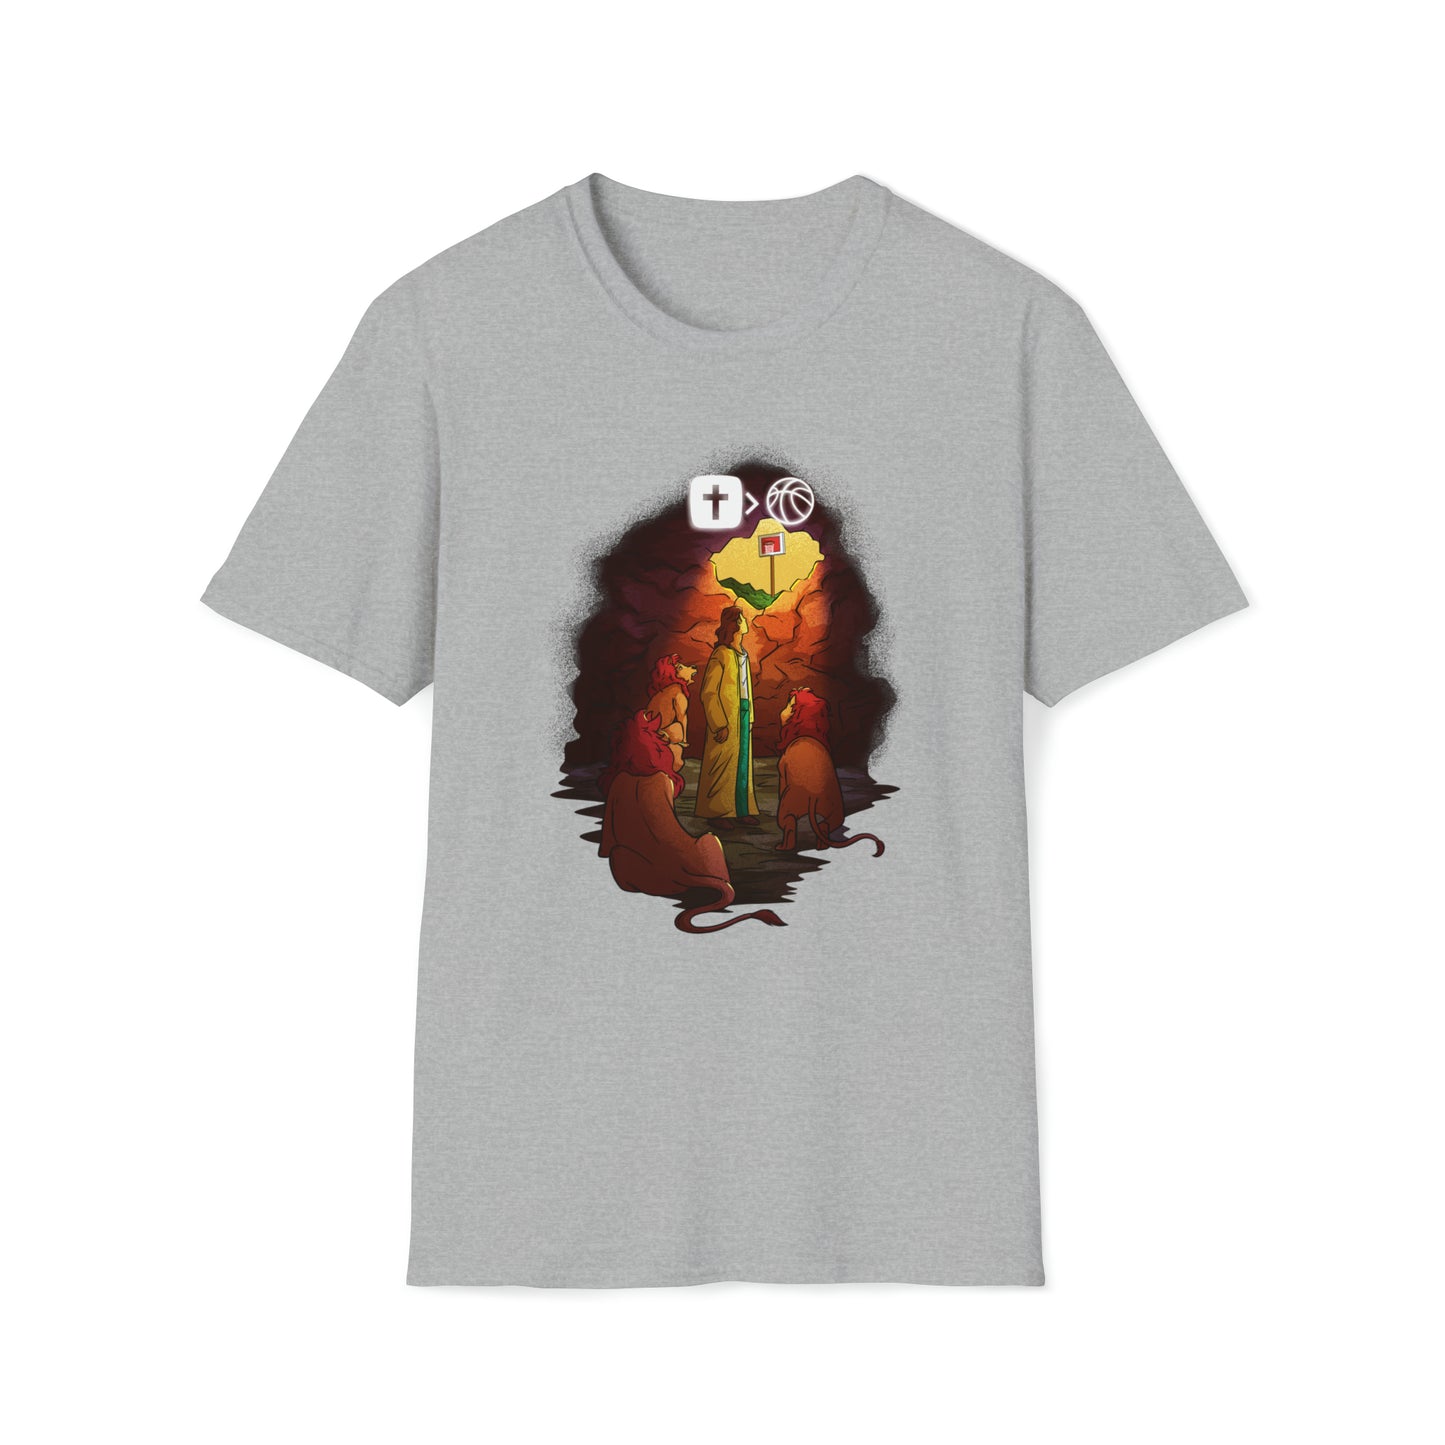 Art Collection "Daniel in the lion's den" Soft Style Unisex Tee